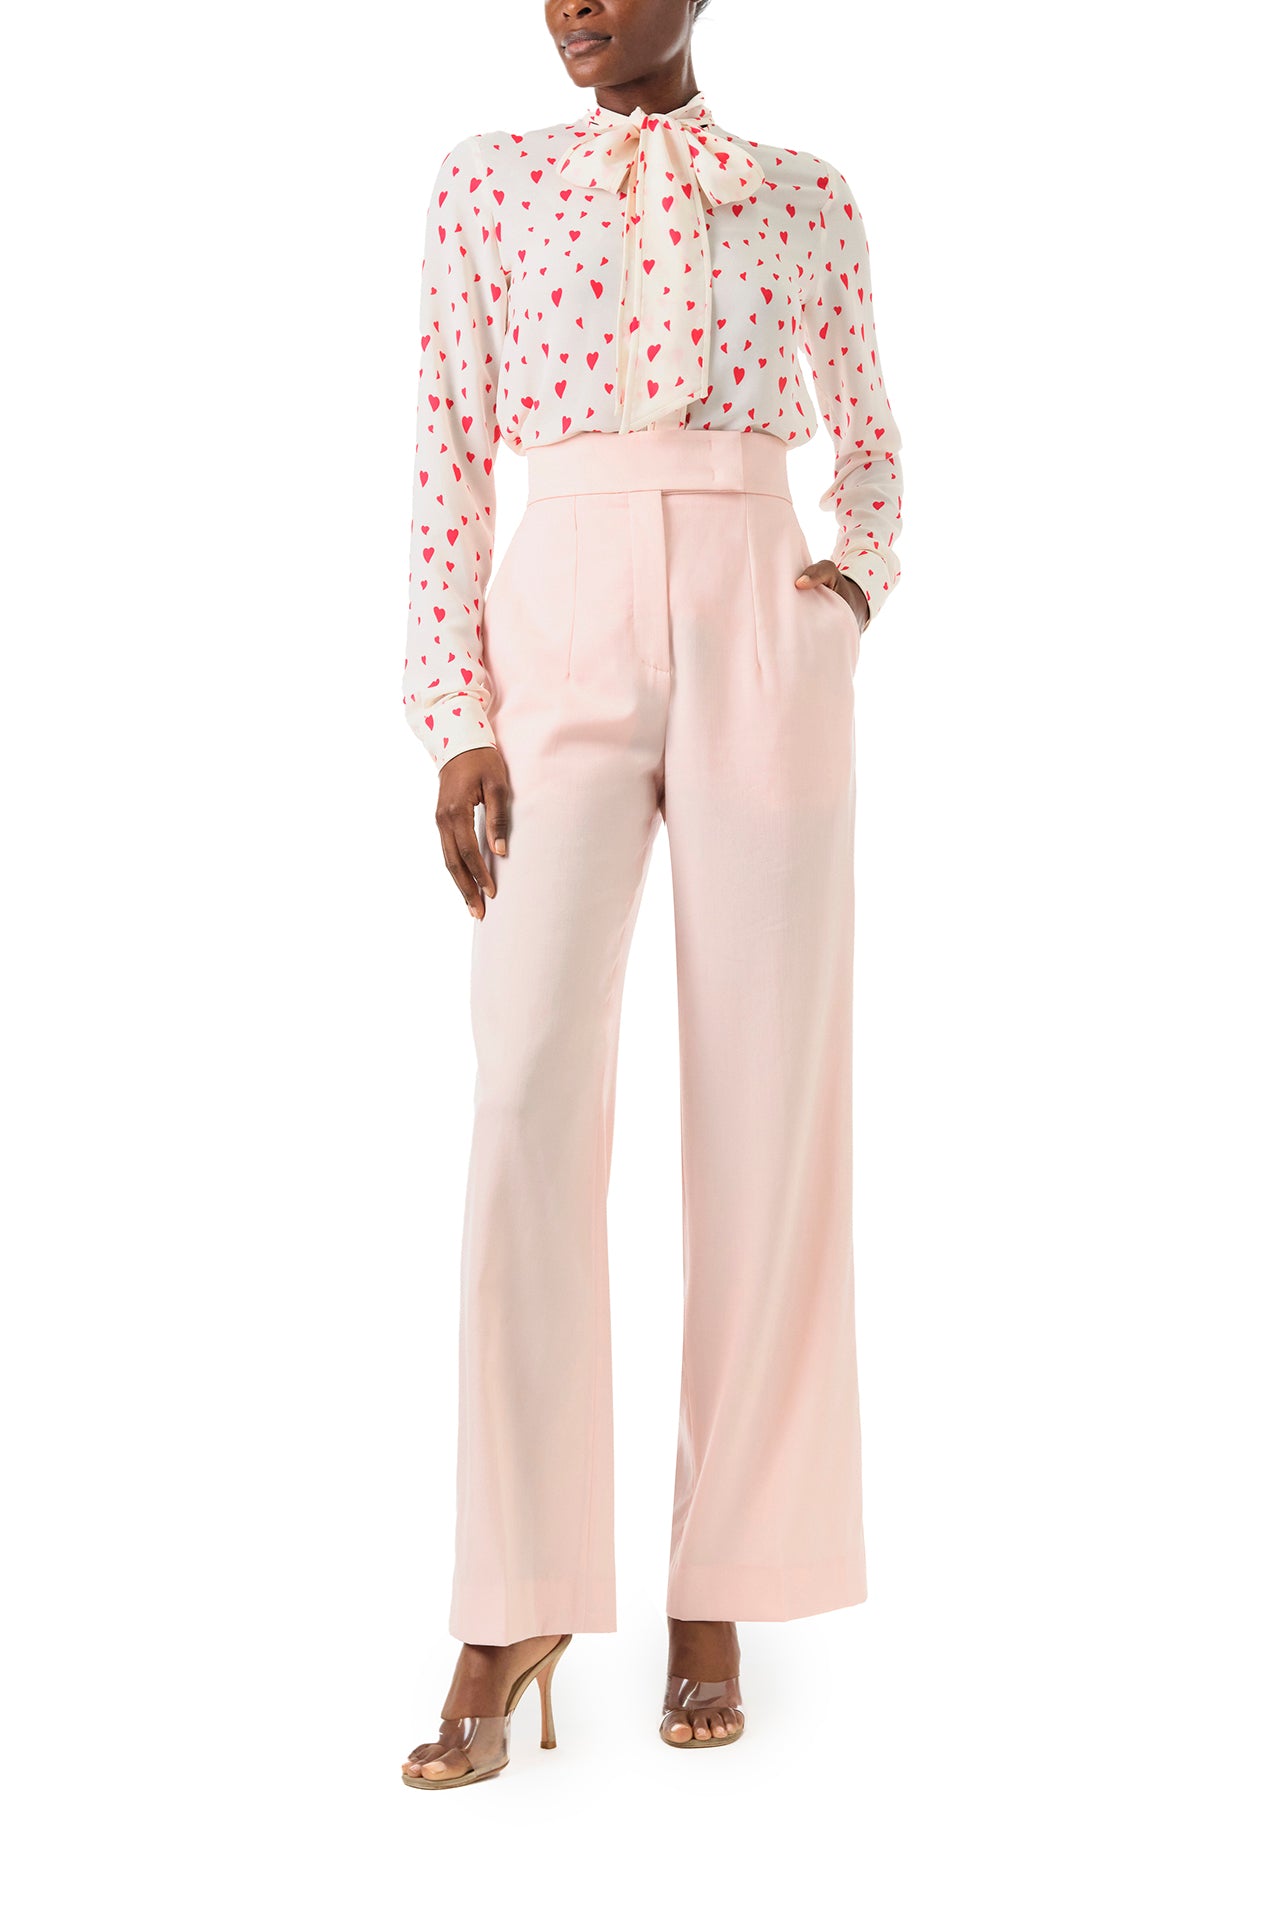 Monique Lhuillier Fall 2024 long sleeve, bow tie blouse in Heart Printed Georgette - front.